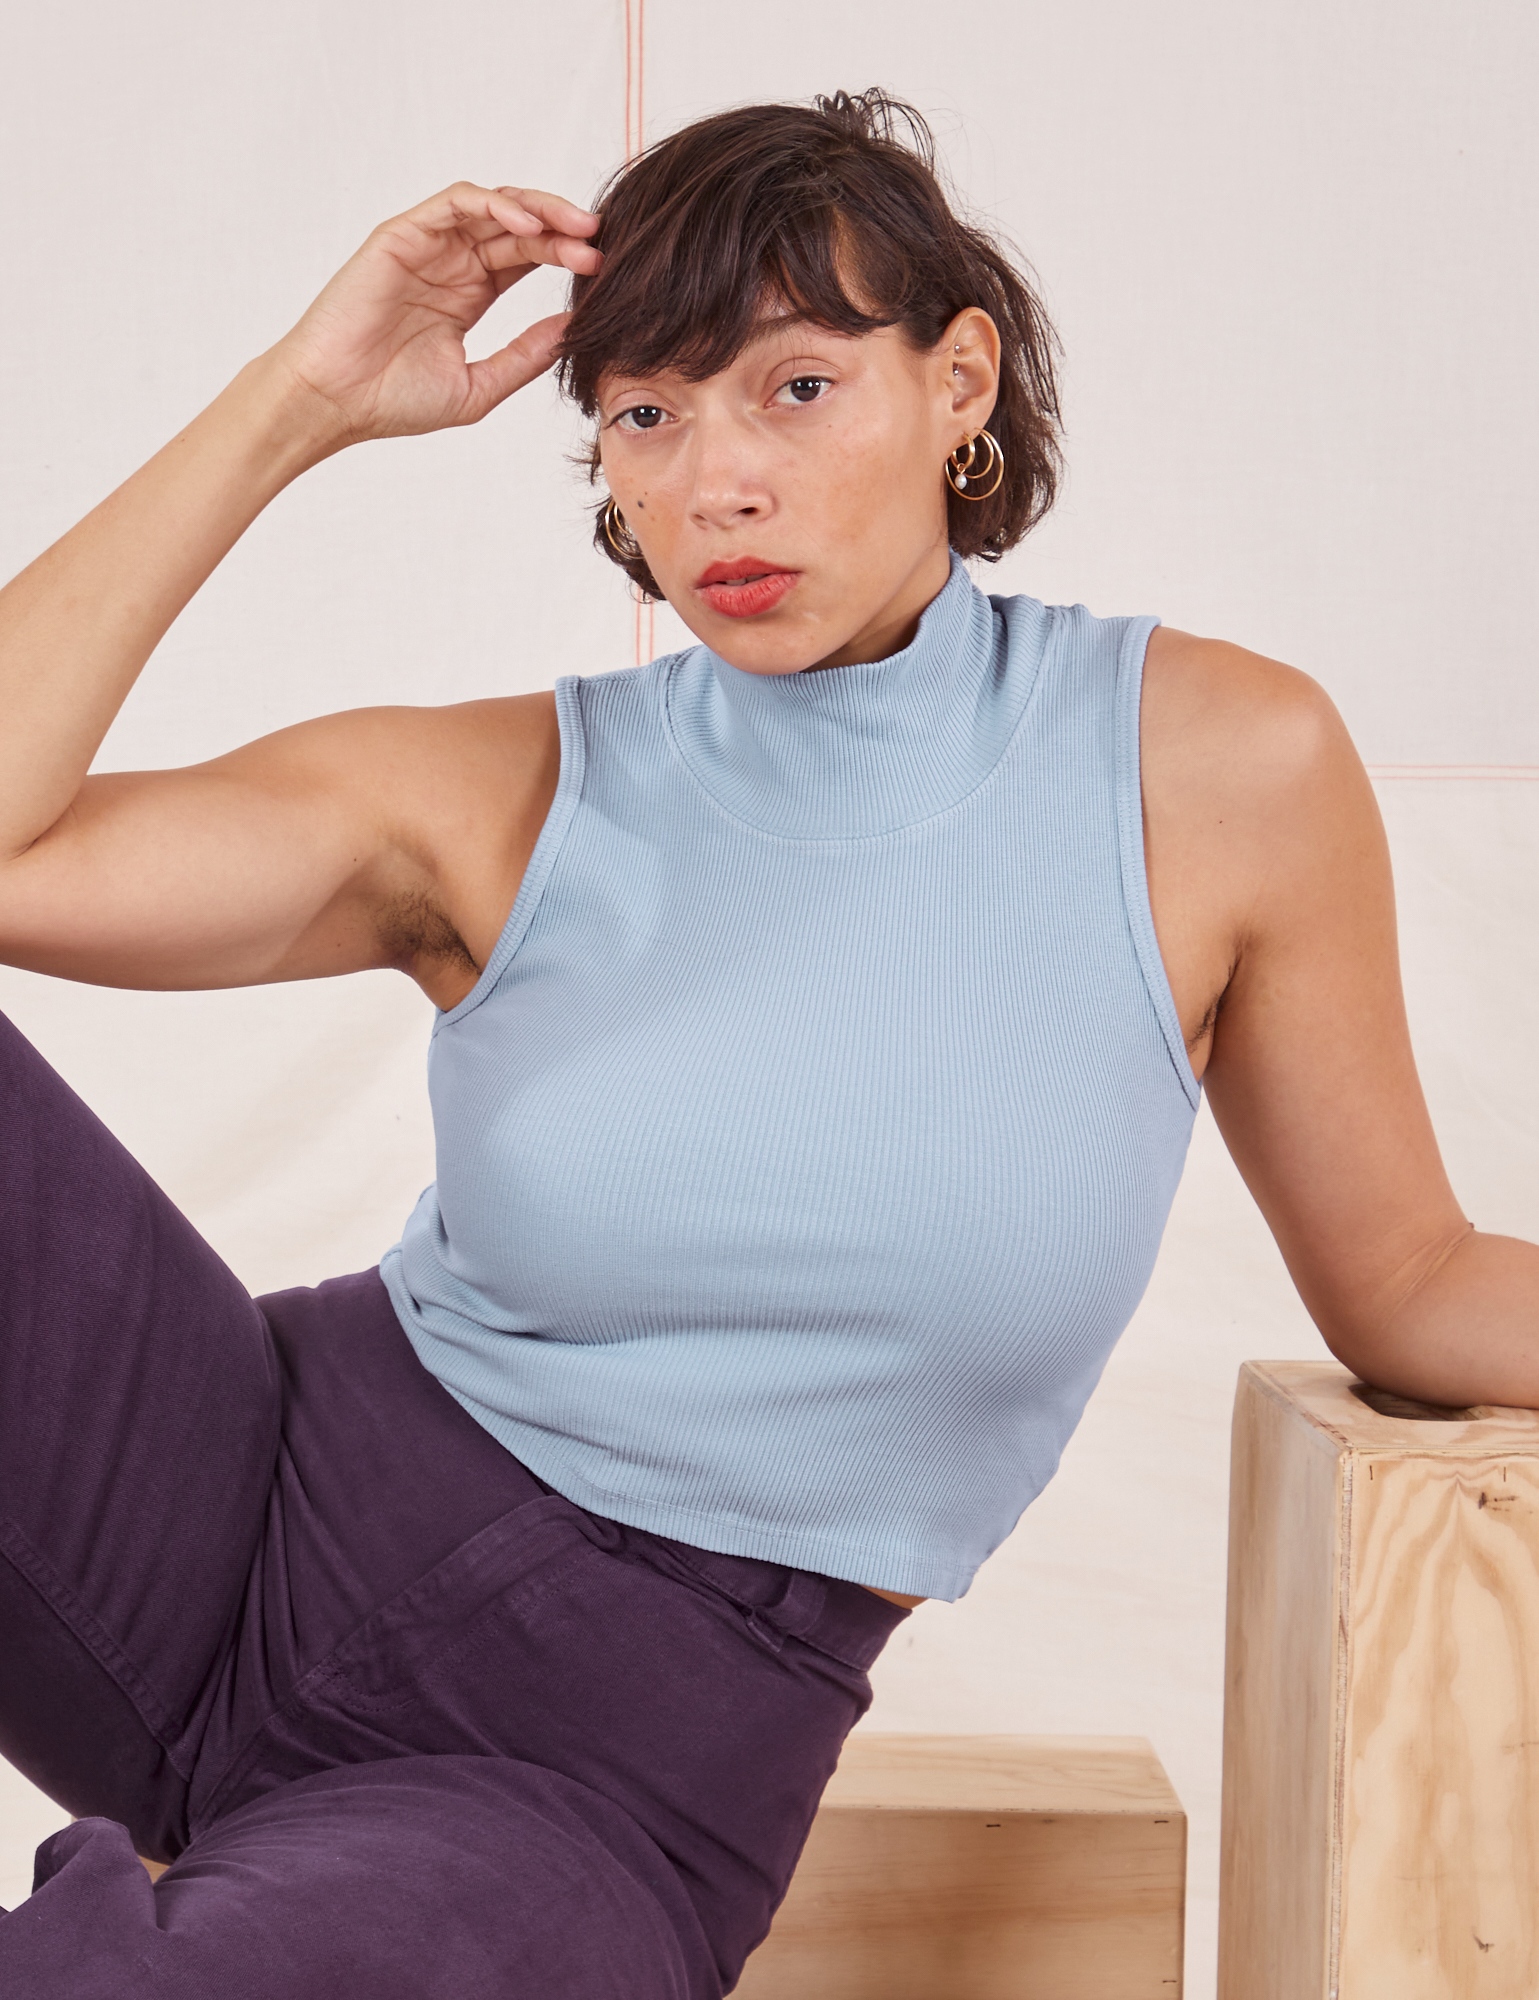 Tiara is 5'4' and wearing XXS Sleeveless Essential Turtleneck in Periwinkle